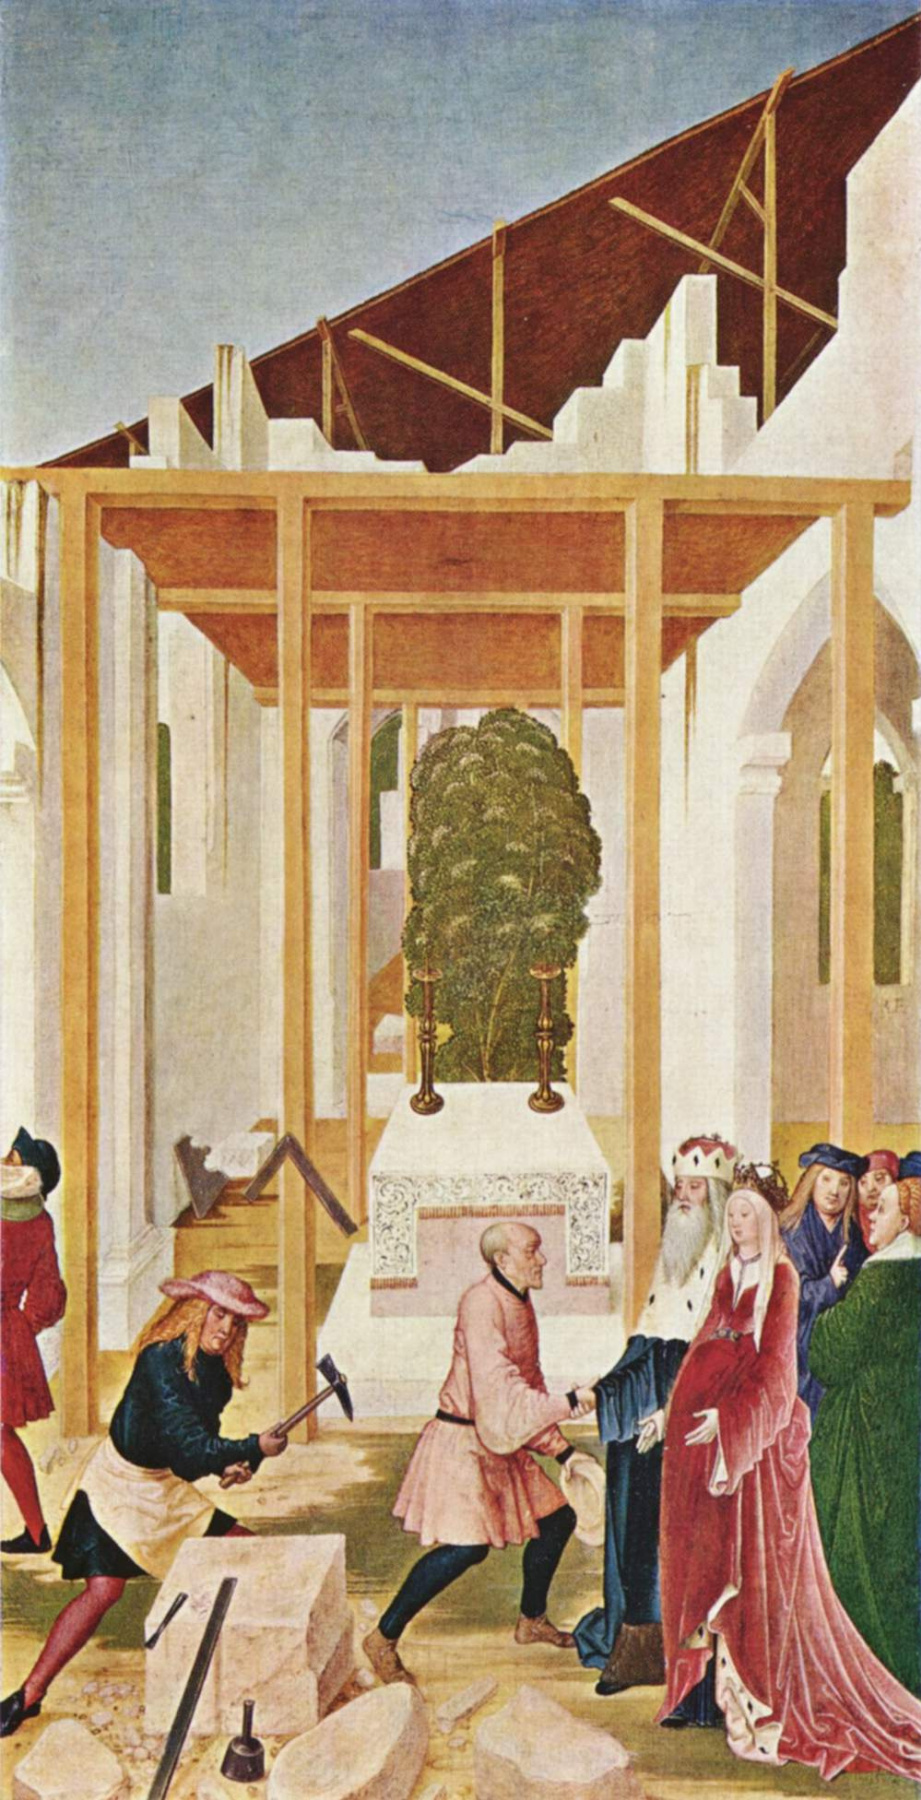 Rueland Fruauf the Younger. The altar of St. Leopold, the side fold: the construction of the monastery Church